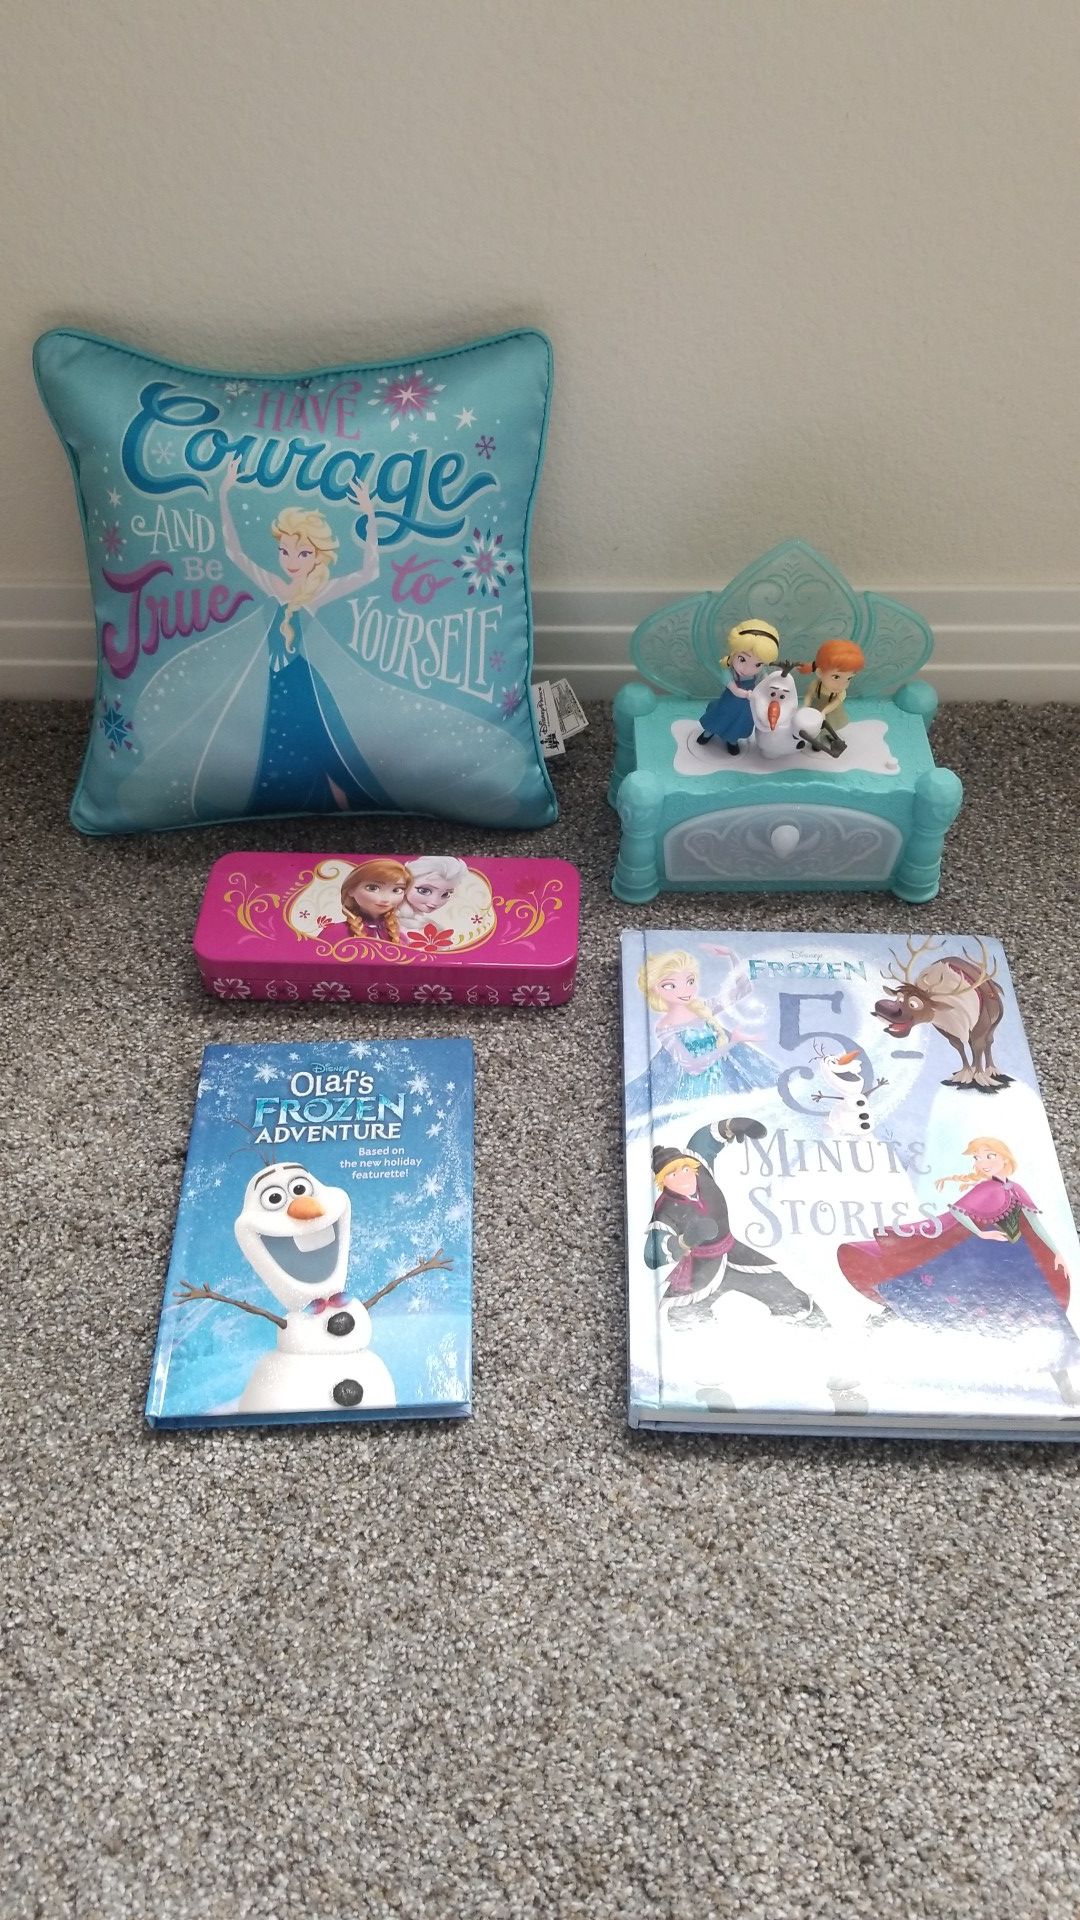 Disney's Frozen Toys and Books